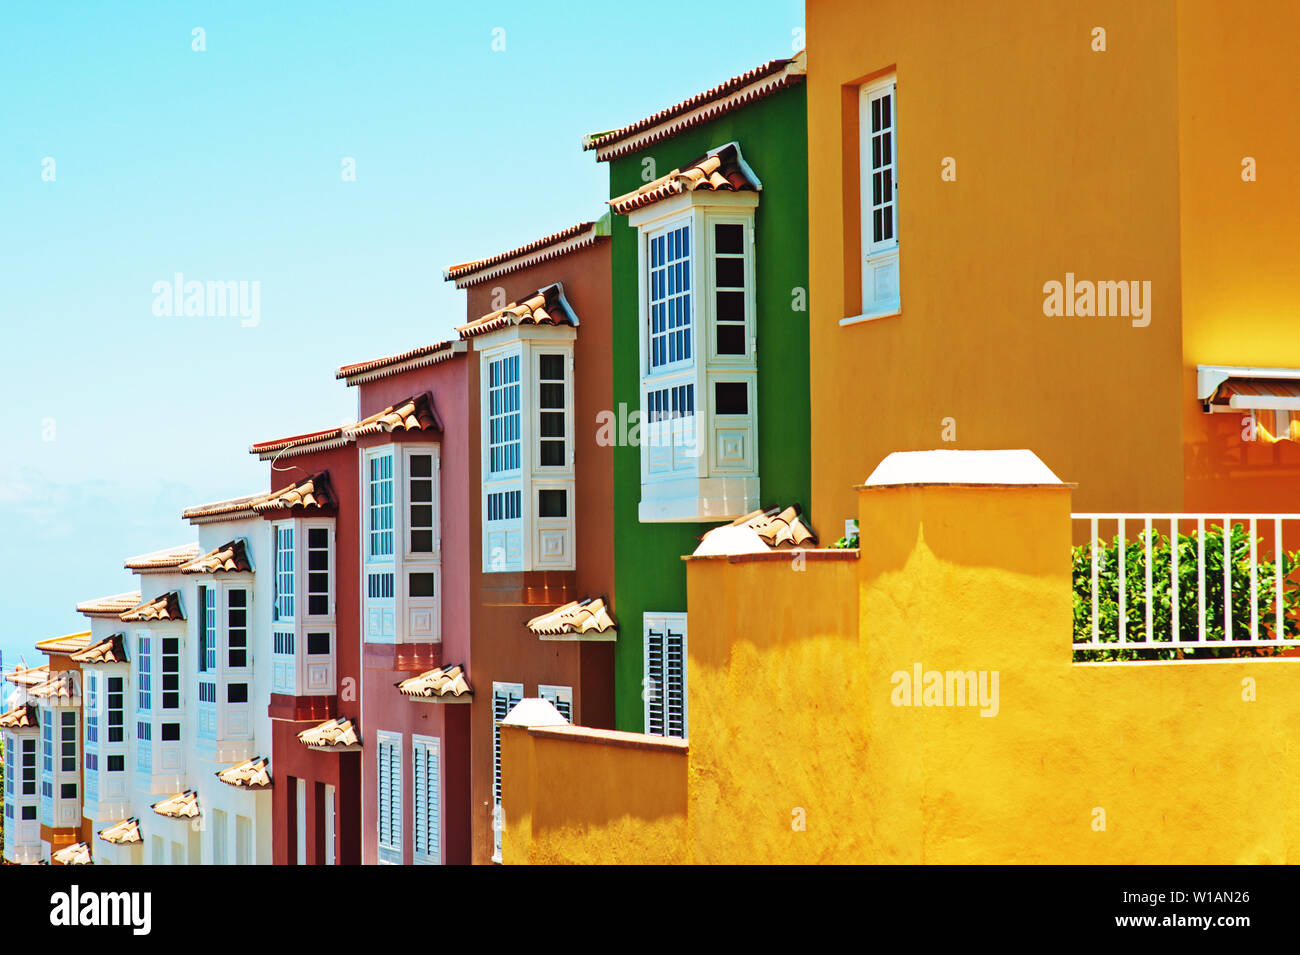 Row of colourful houses and clear blue sky on Tenerife, Canary Islands, Spain. Stock Photo